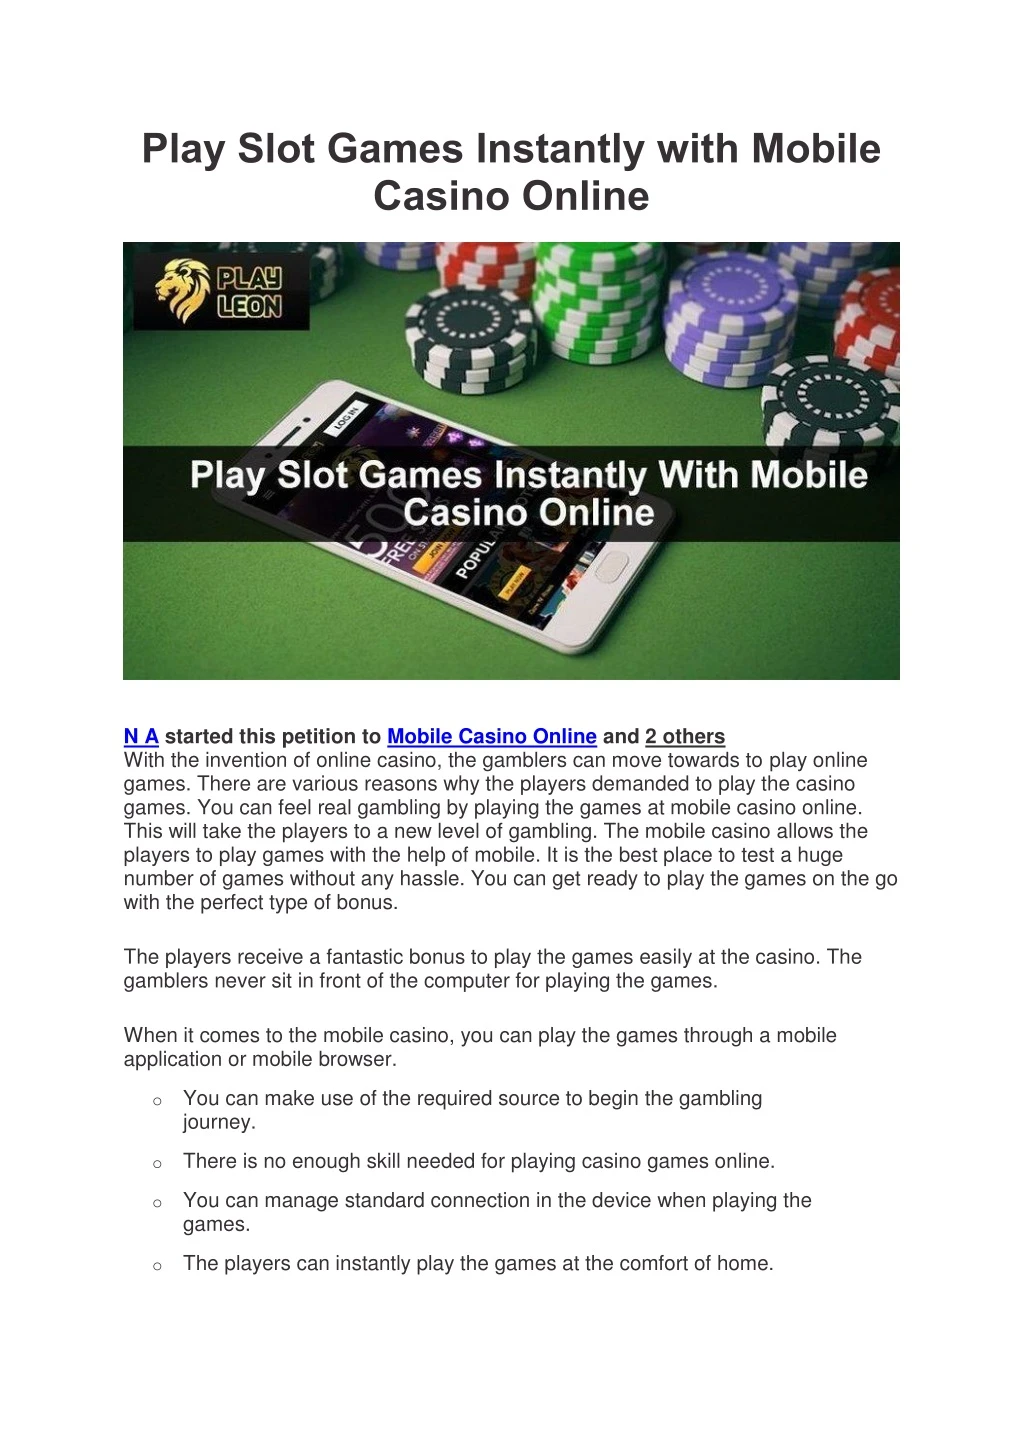 play slot games instantly with mobile casino